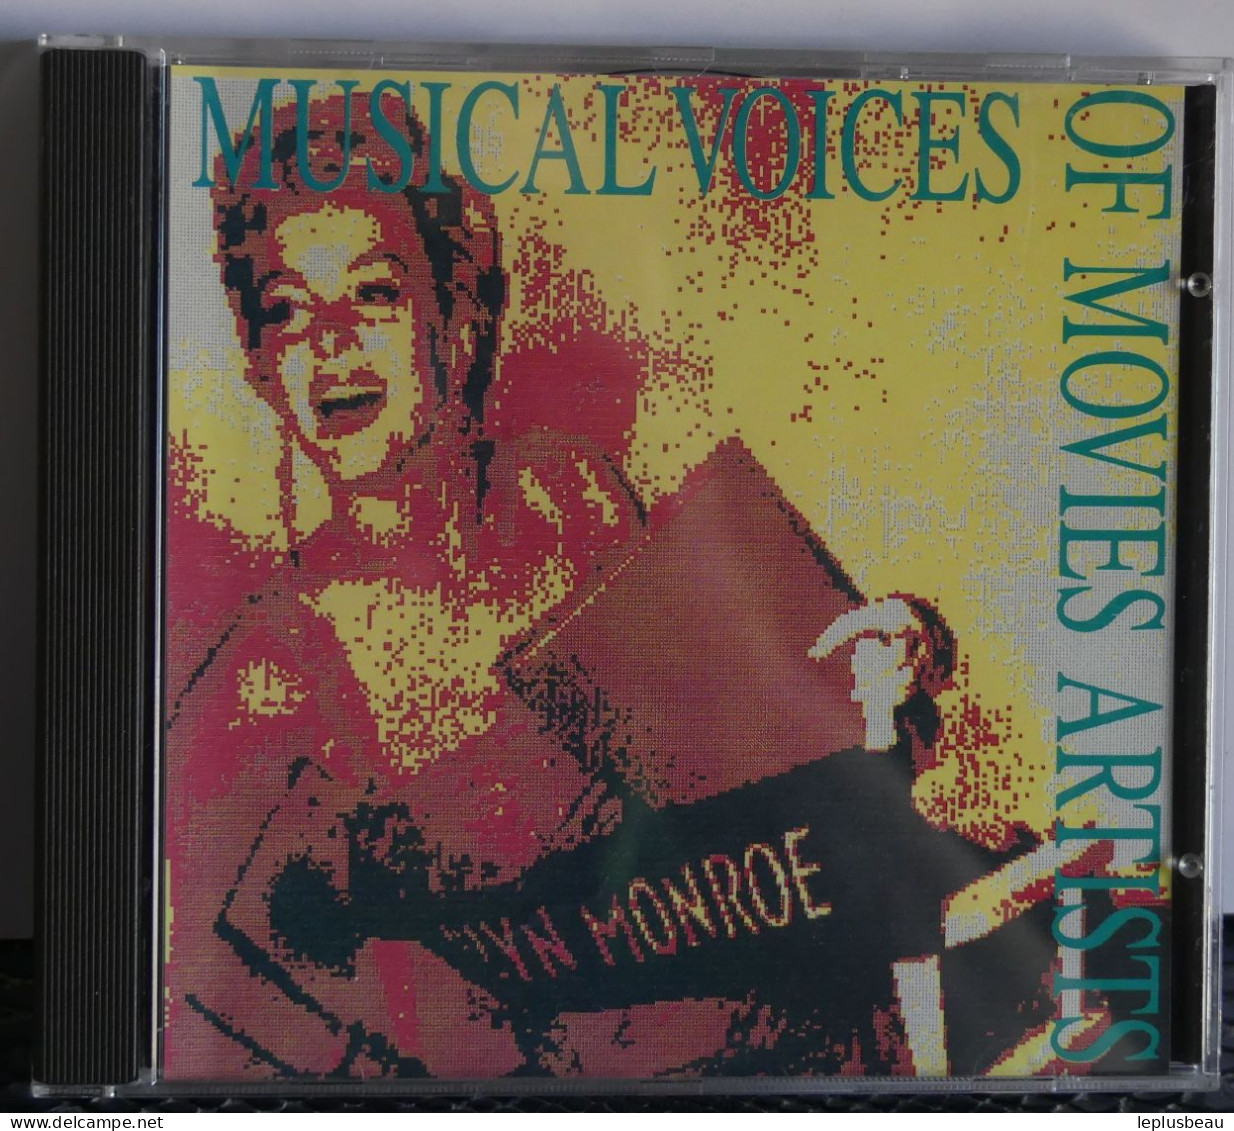 CD The Musical Voices - Compilations